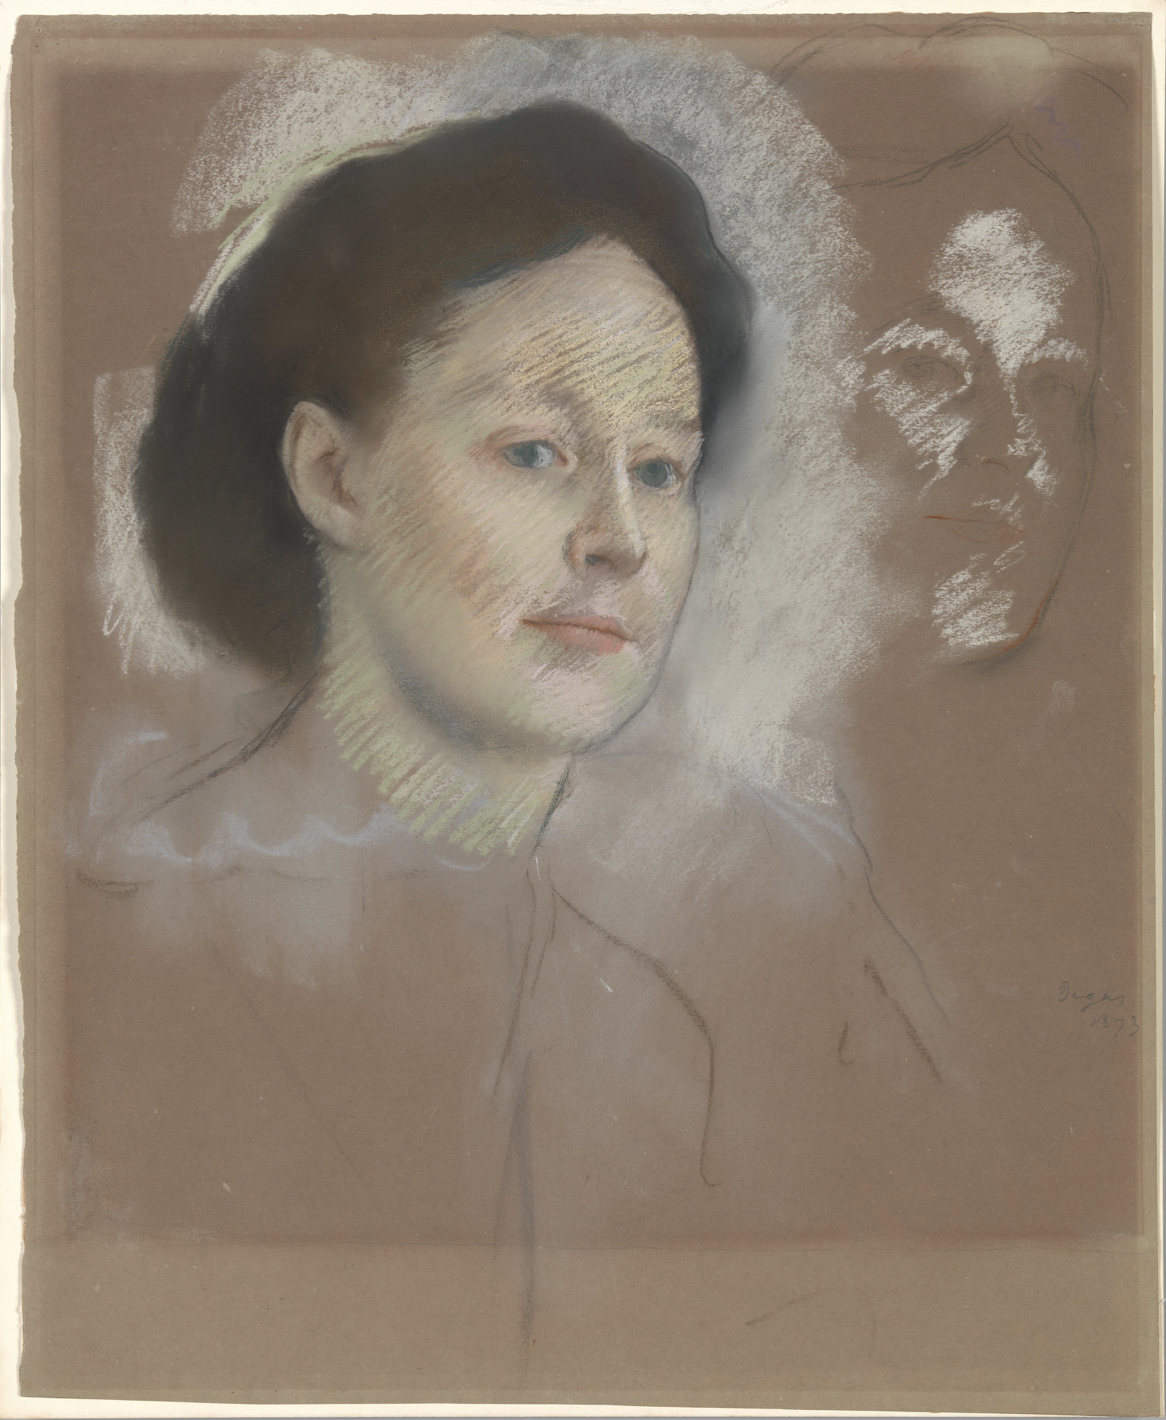 Edgar Degas, "The Artist's Cousin, Probably Mrs. William Bell (Mathilde Musson)," 1873, pastel on green wove paper, now darkened to brown, 18 5/8 x 15 1/8 in (47.3 x 38.4 cm), The Met, New York, USA.